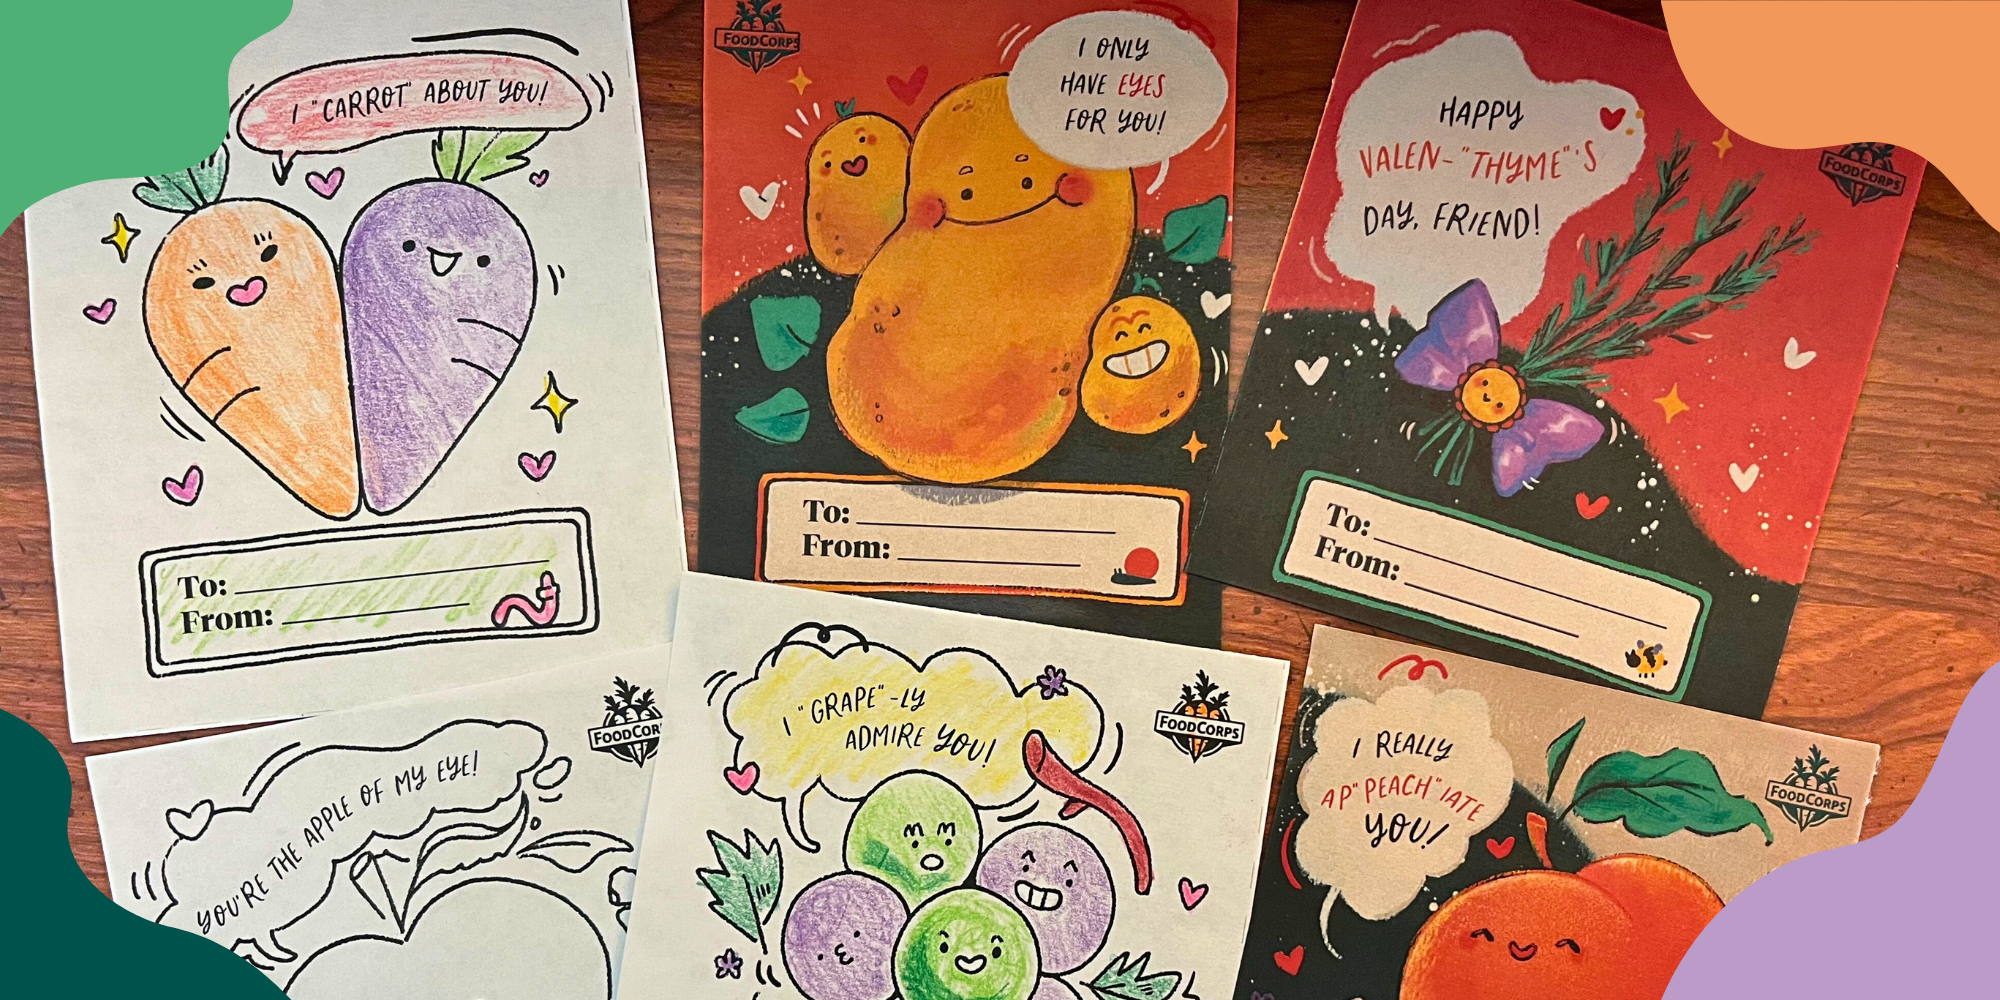 An assortment of FoodCorps valentine cards with decorative color blobs in the corners